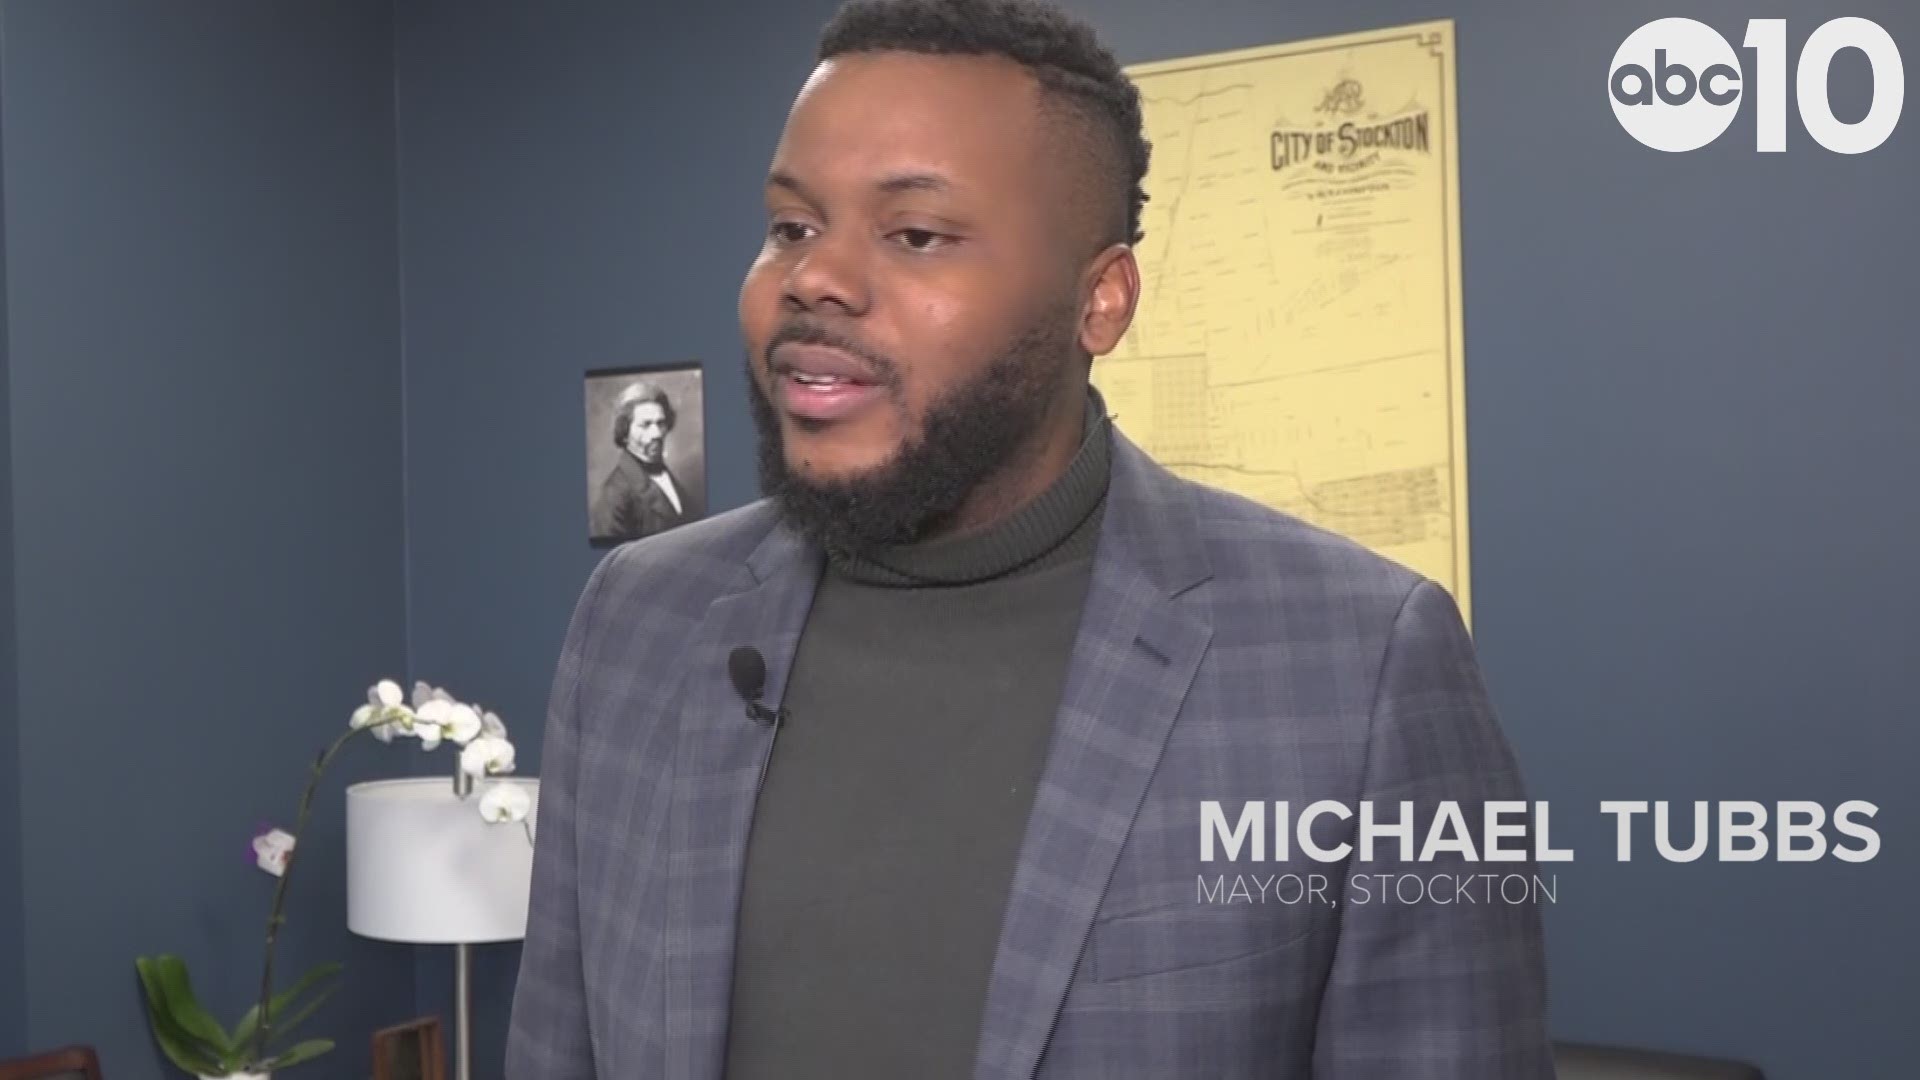 The city had less homicides in the second half of 2019 than it did in the first, something Mayor Michael Tubbs credits to credits to new programs and partnerships.